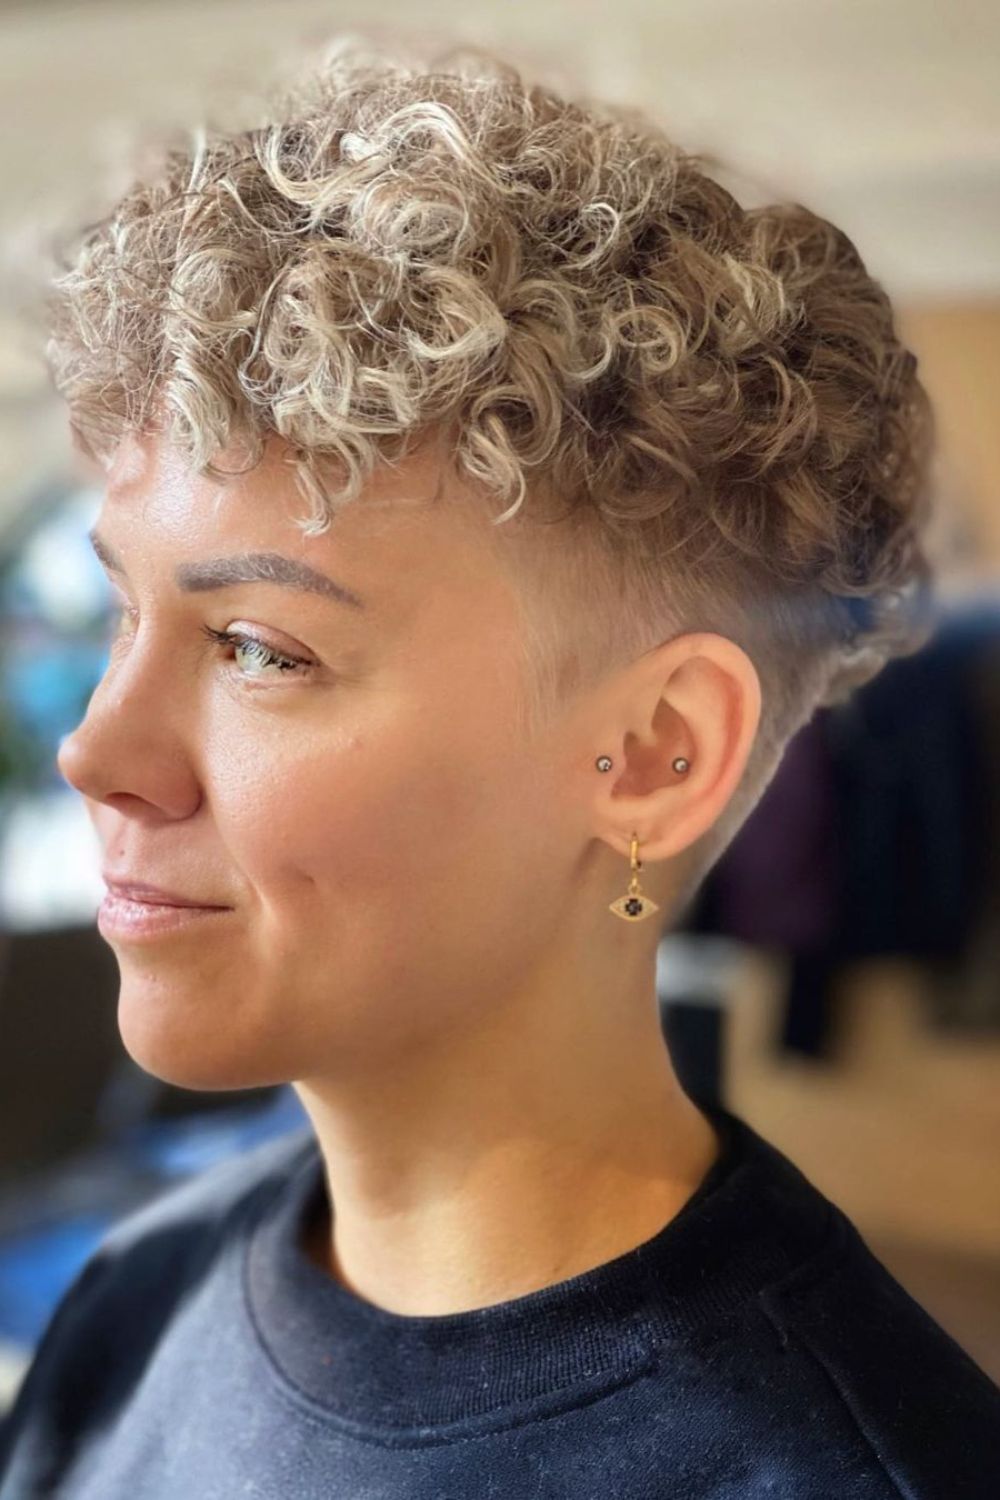 A woman with a blonde curly bowl cut.